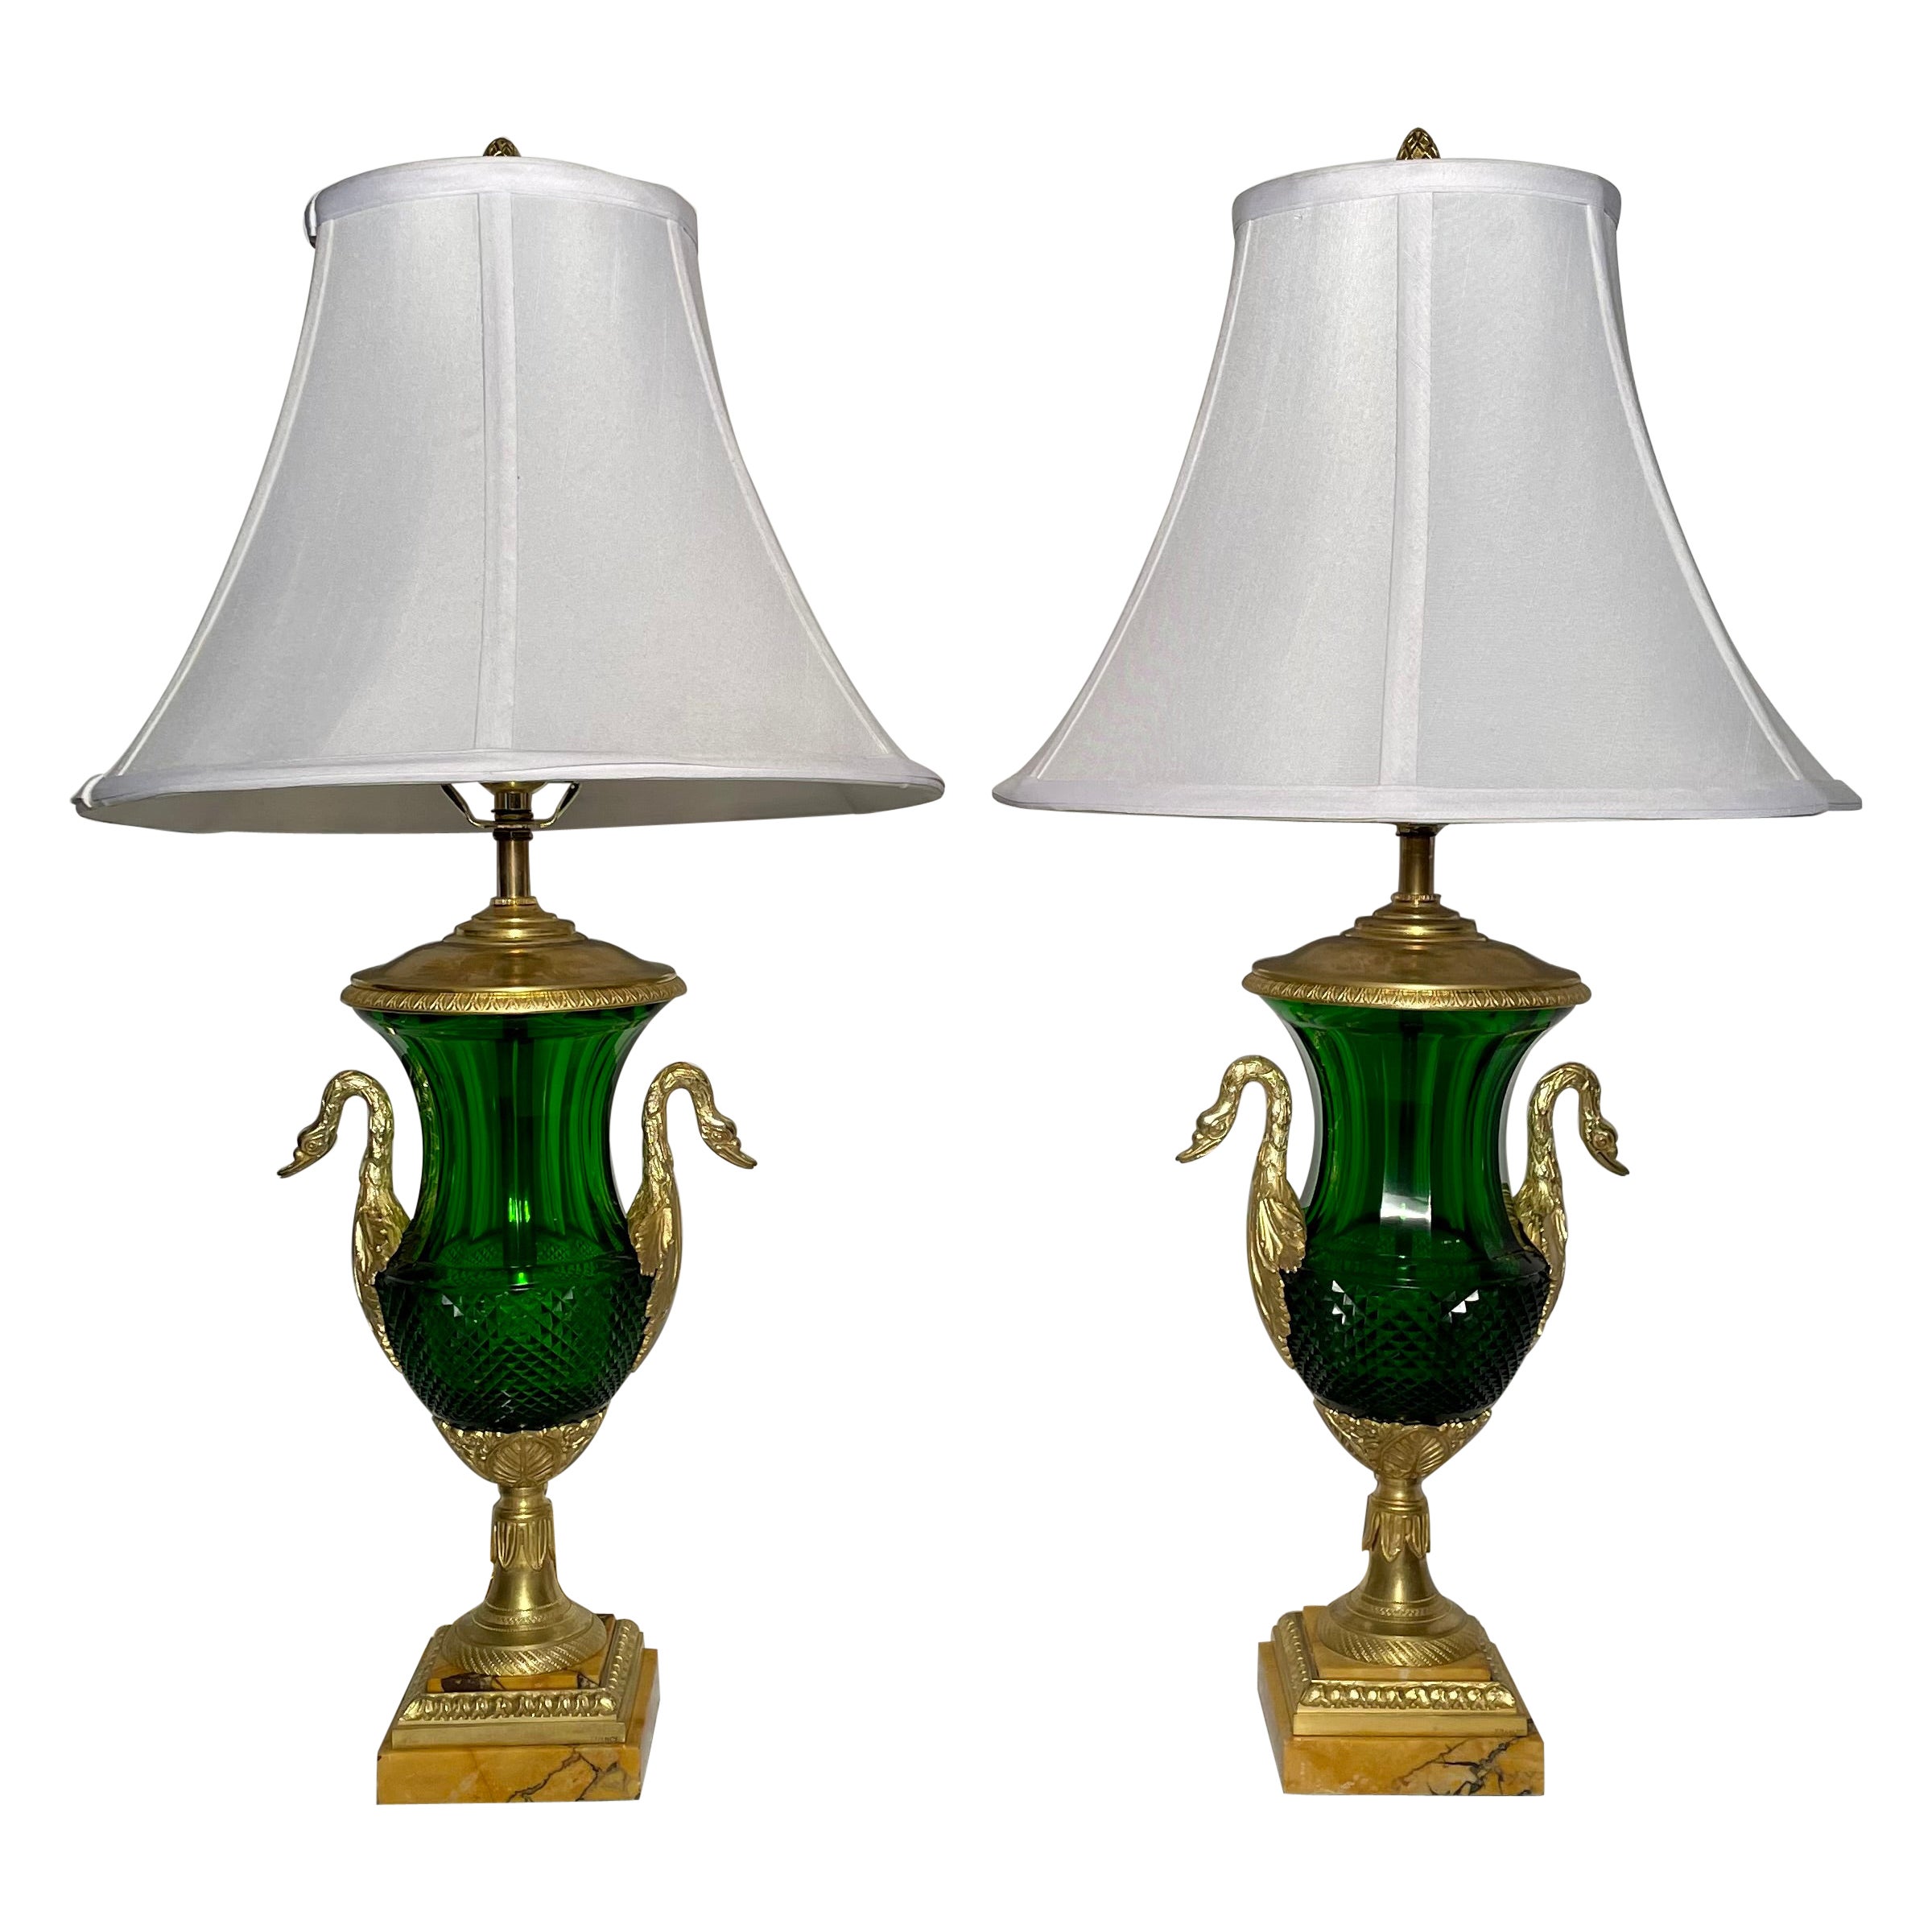 Pair Antique French Emerald Colored Baccarat Crystal & Gold Bronze Lamps, c 1890